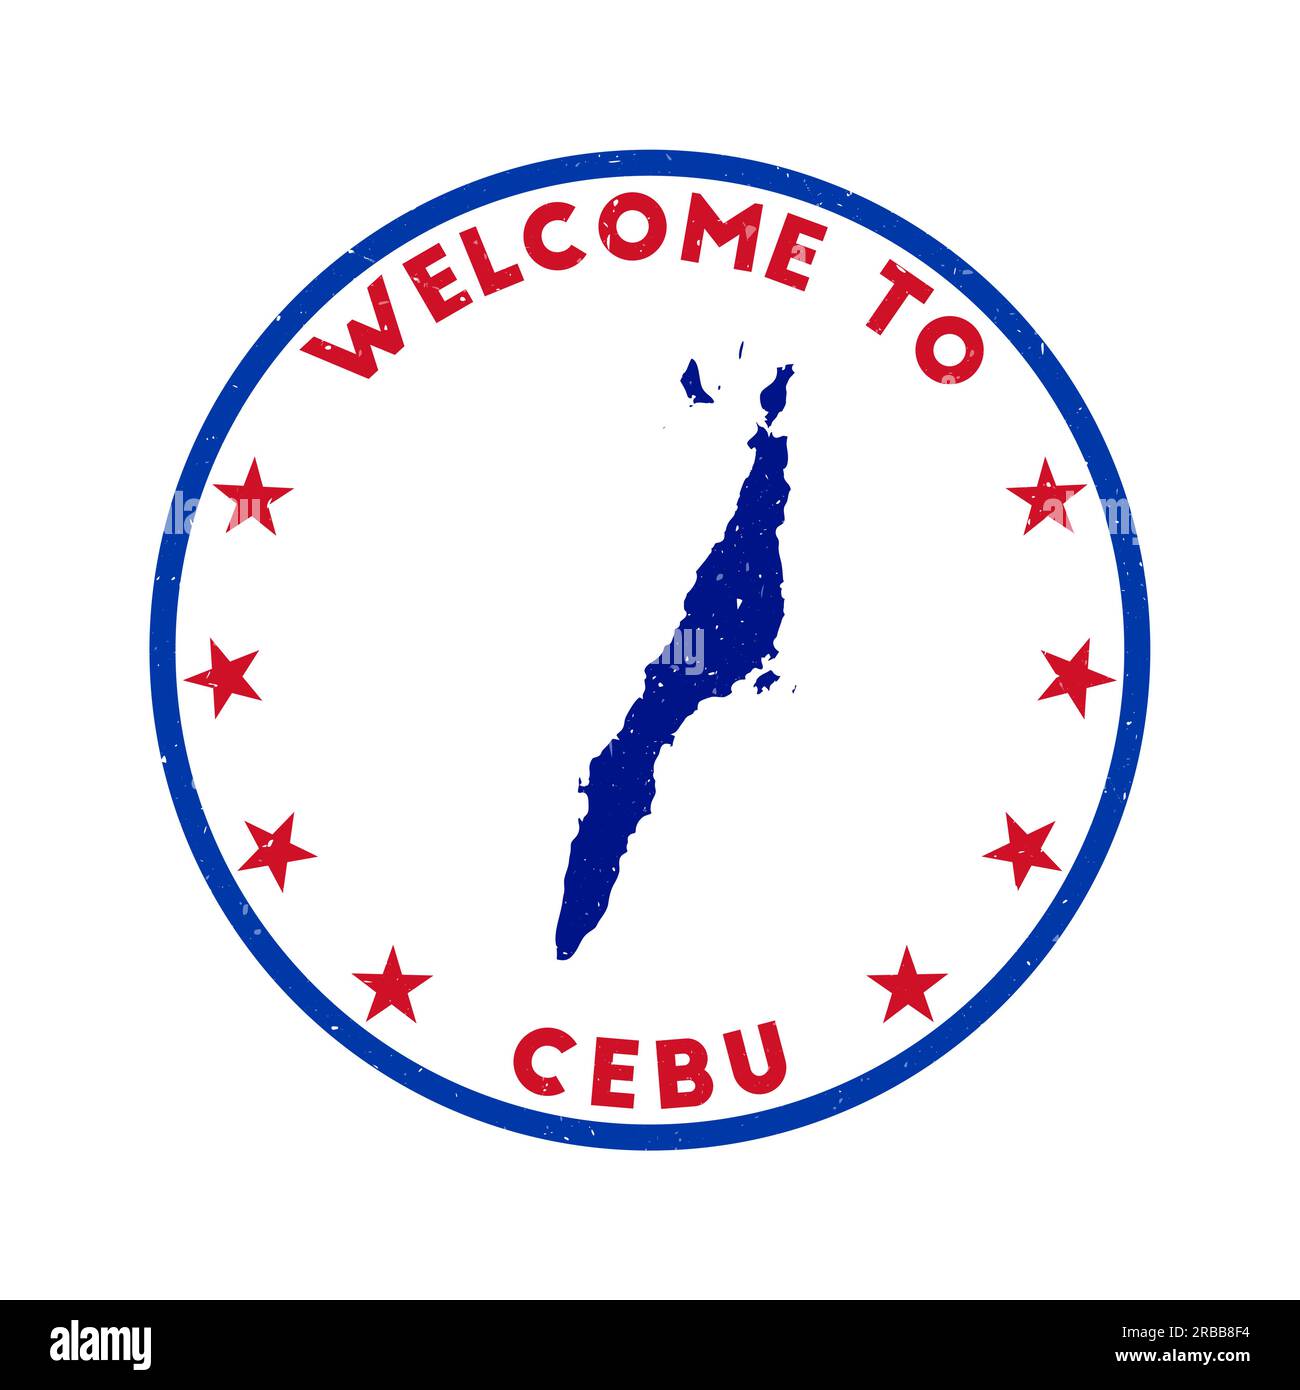 Welcome to Cebu stamp. Grunge island round stamp with texture in Super Rose Red color theme. Vintage style geometric Cebu seal. Vibrant vector illustr Stock Vector